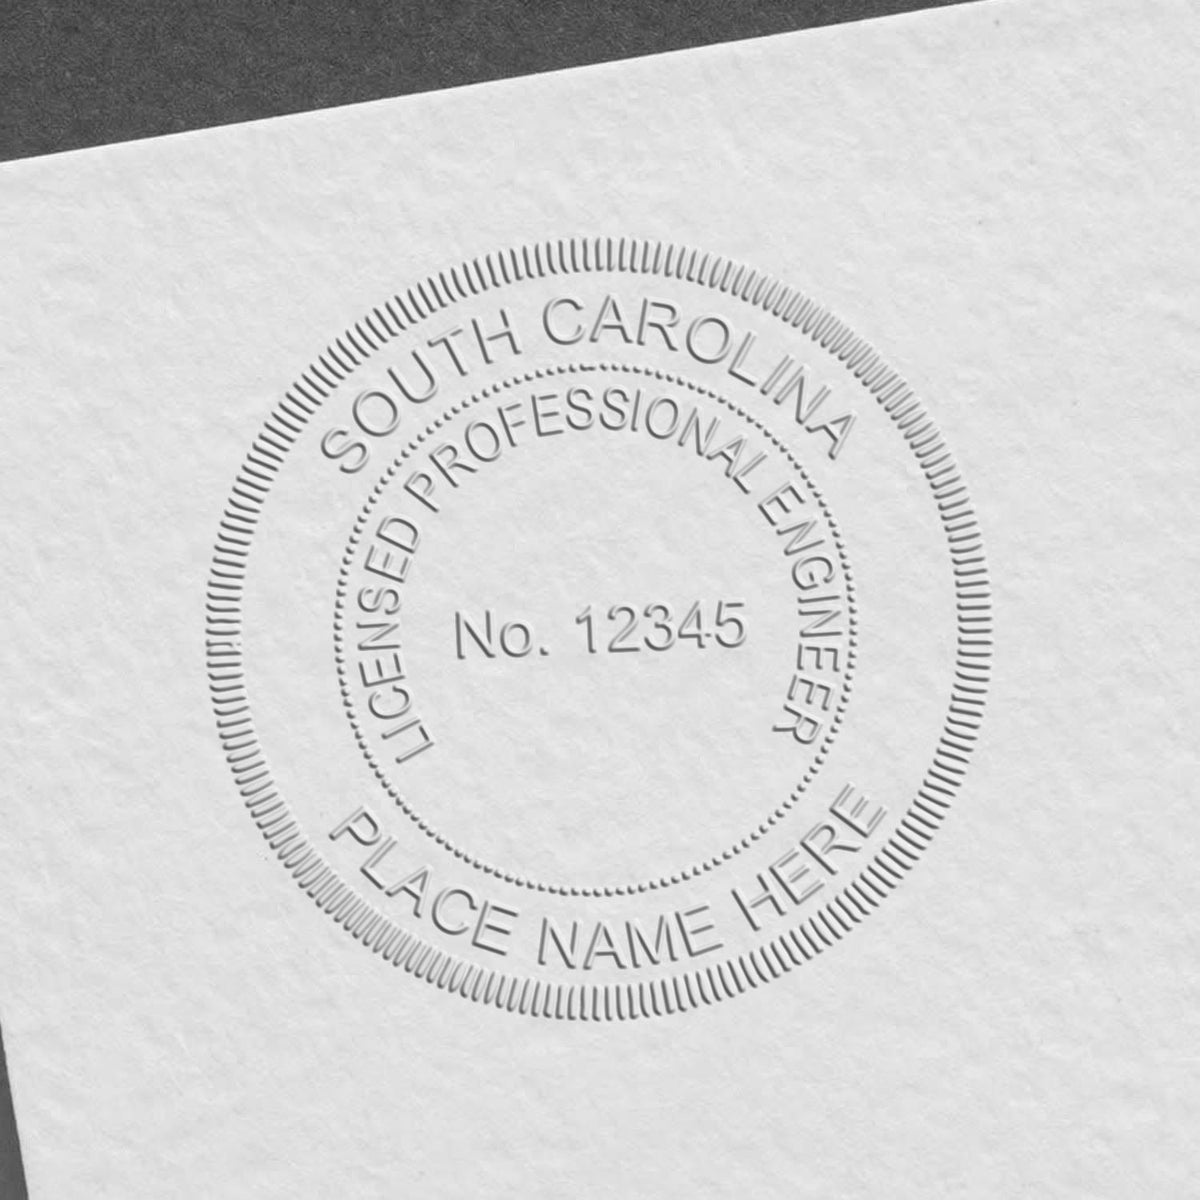 A stamped impression of the Soft South Carolina Professional Engineer Seal in this stylish lifestyle photo, setting the tone for a unique and personalized product.